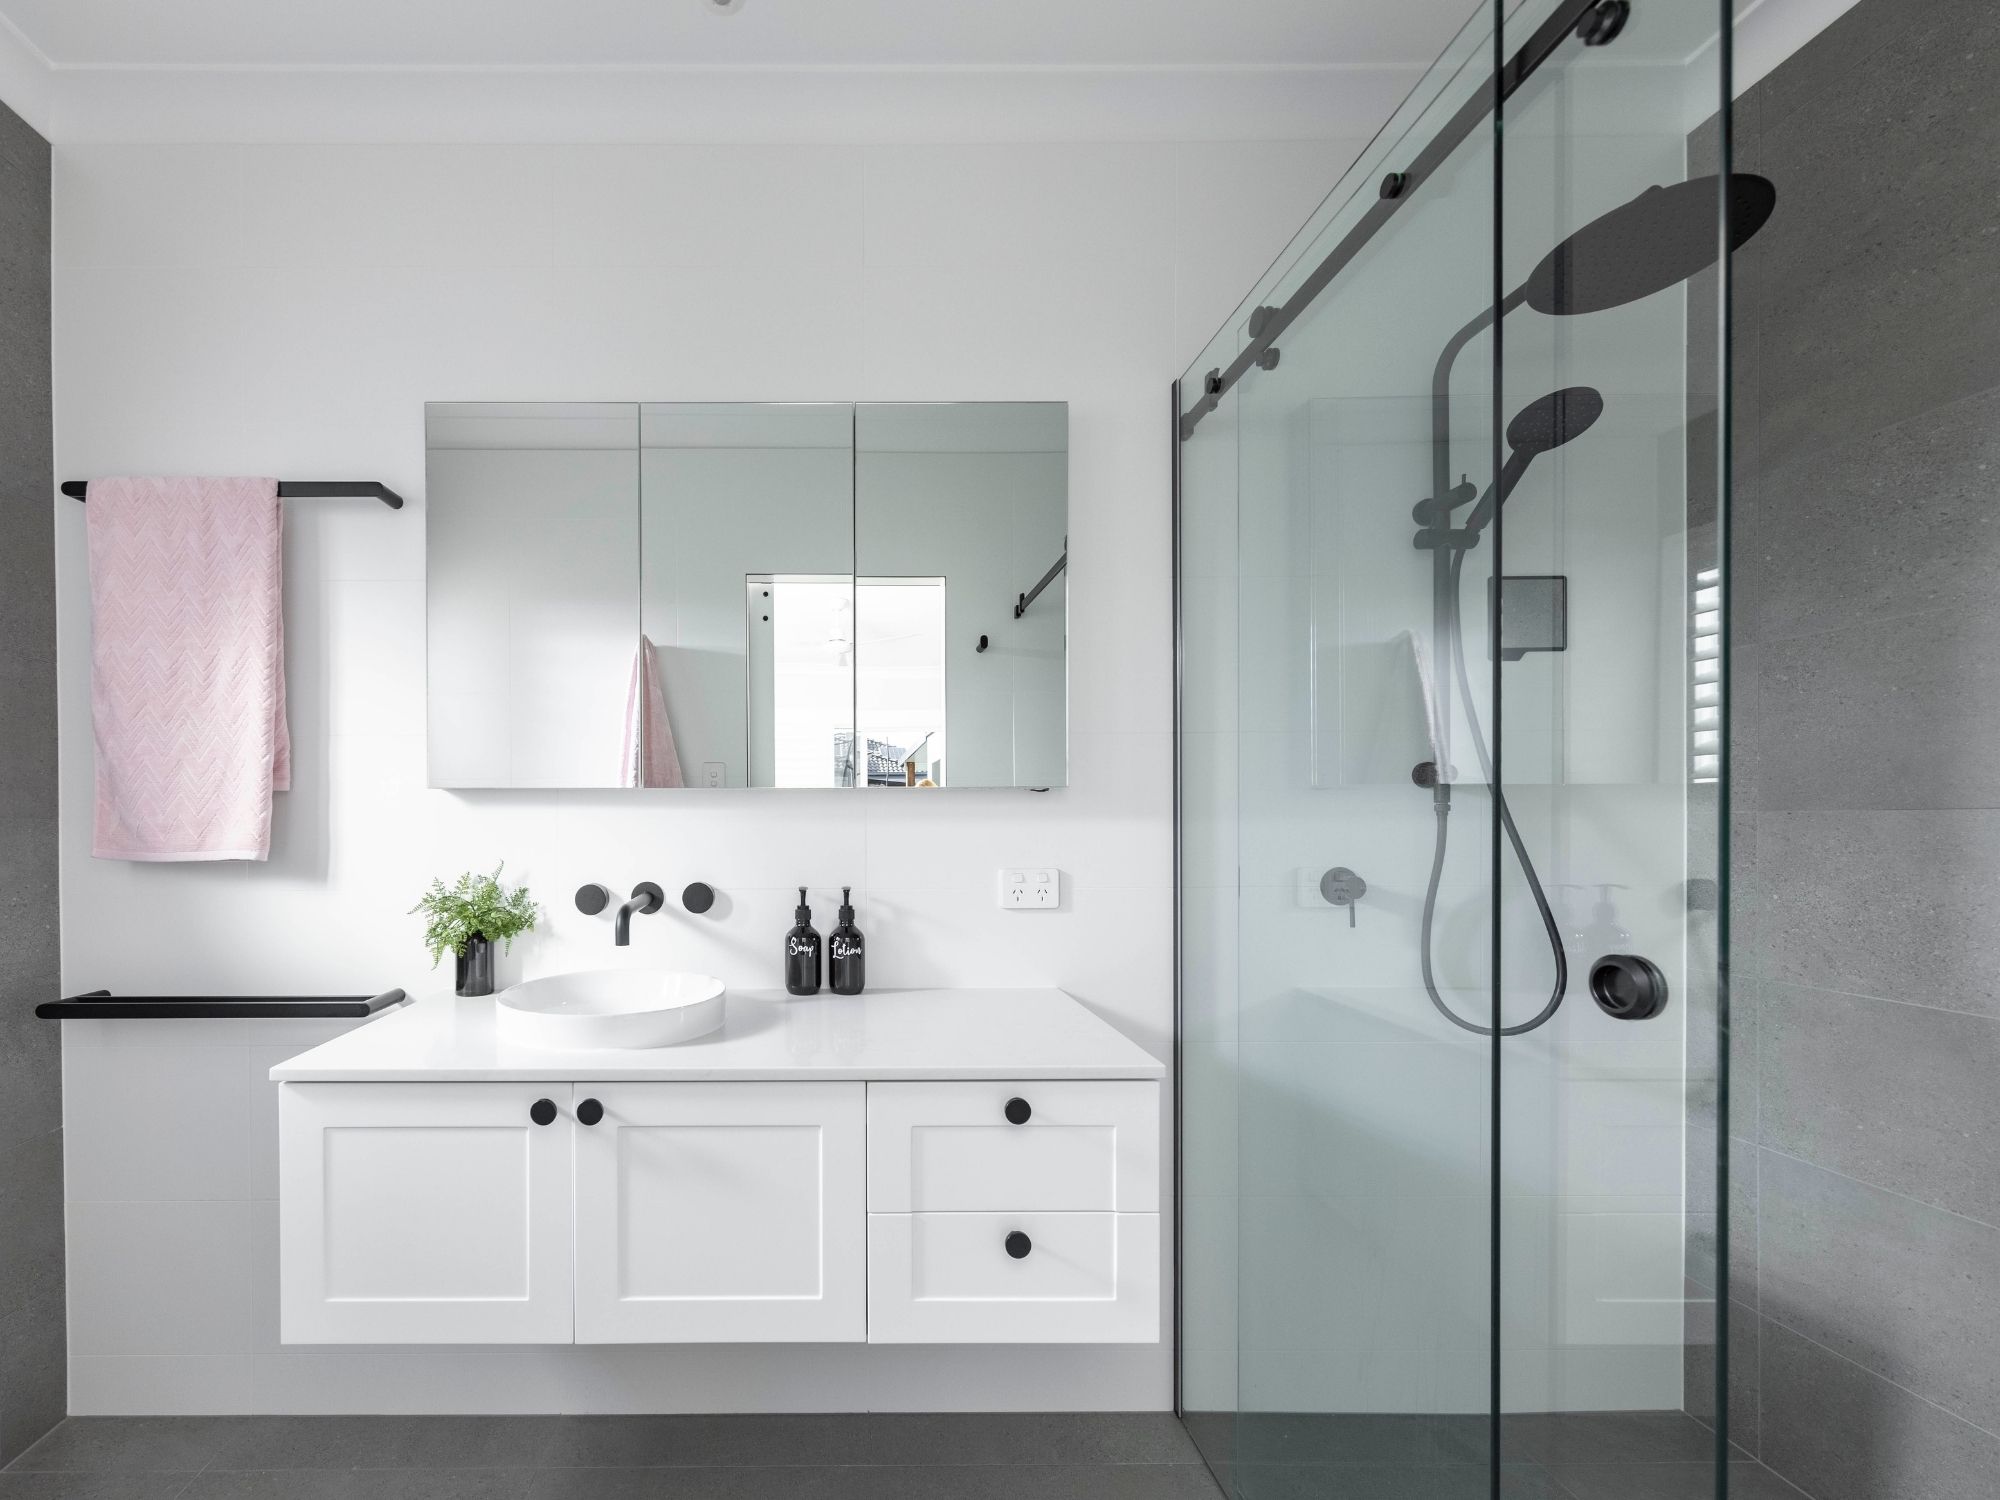 How to design your small bathroom space for less